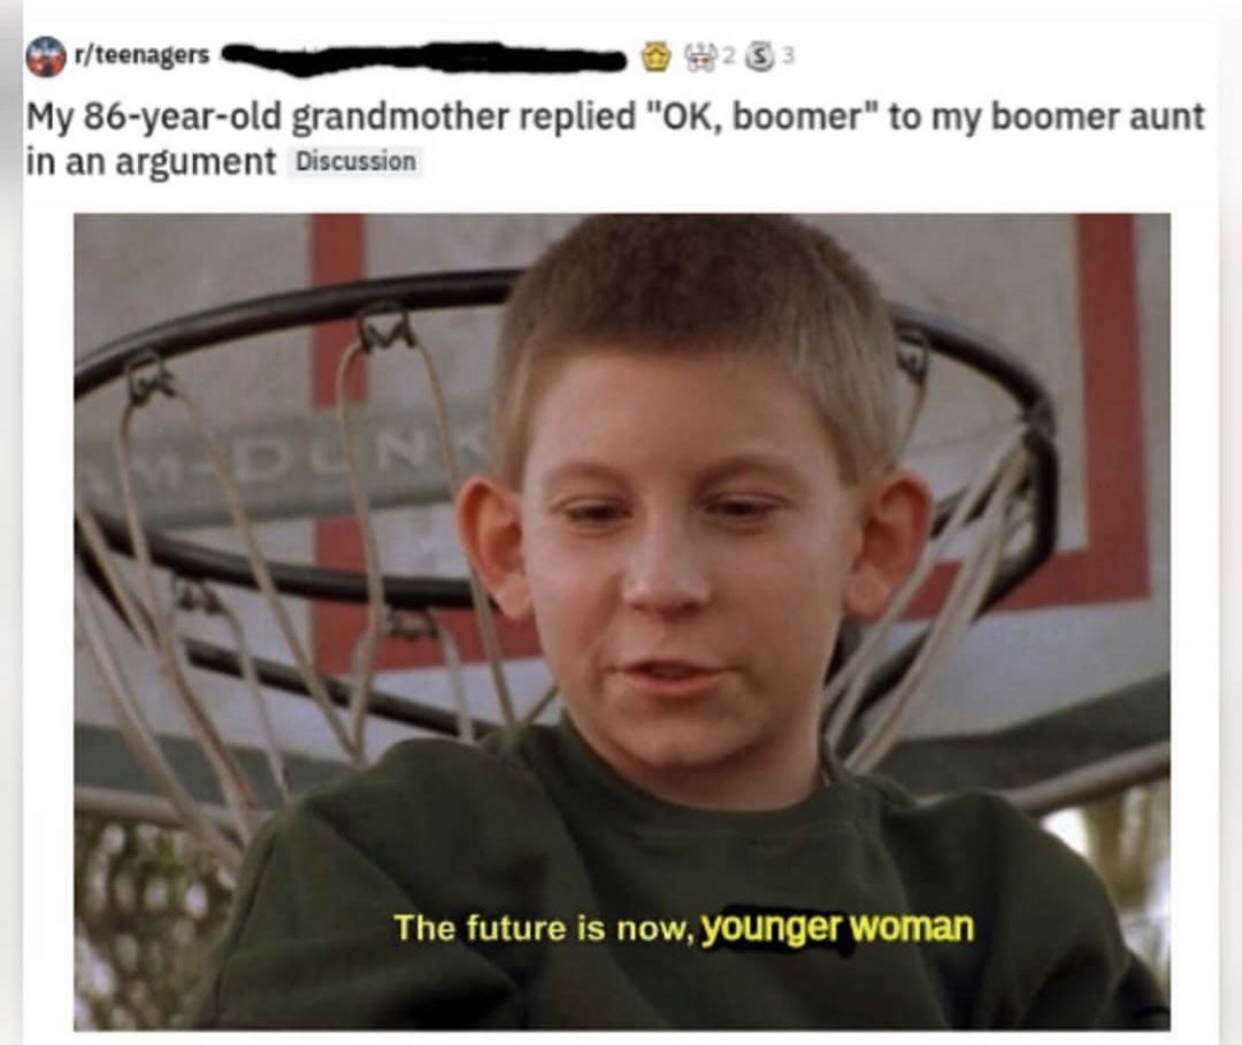 like comment and subscribe meme - rteenagers My 86yearold grandmother replied "Ok, boomer" to my boomer aunt in an argument Discussion The future is now, younger woman